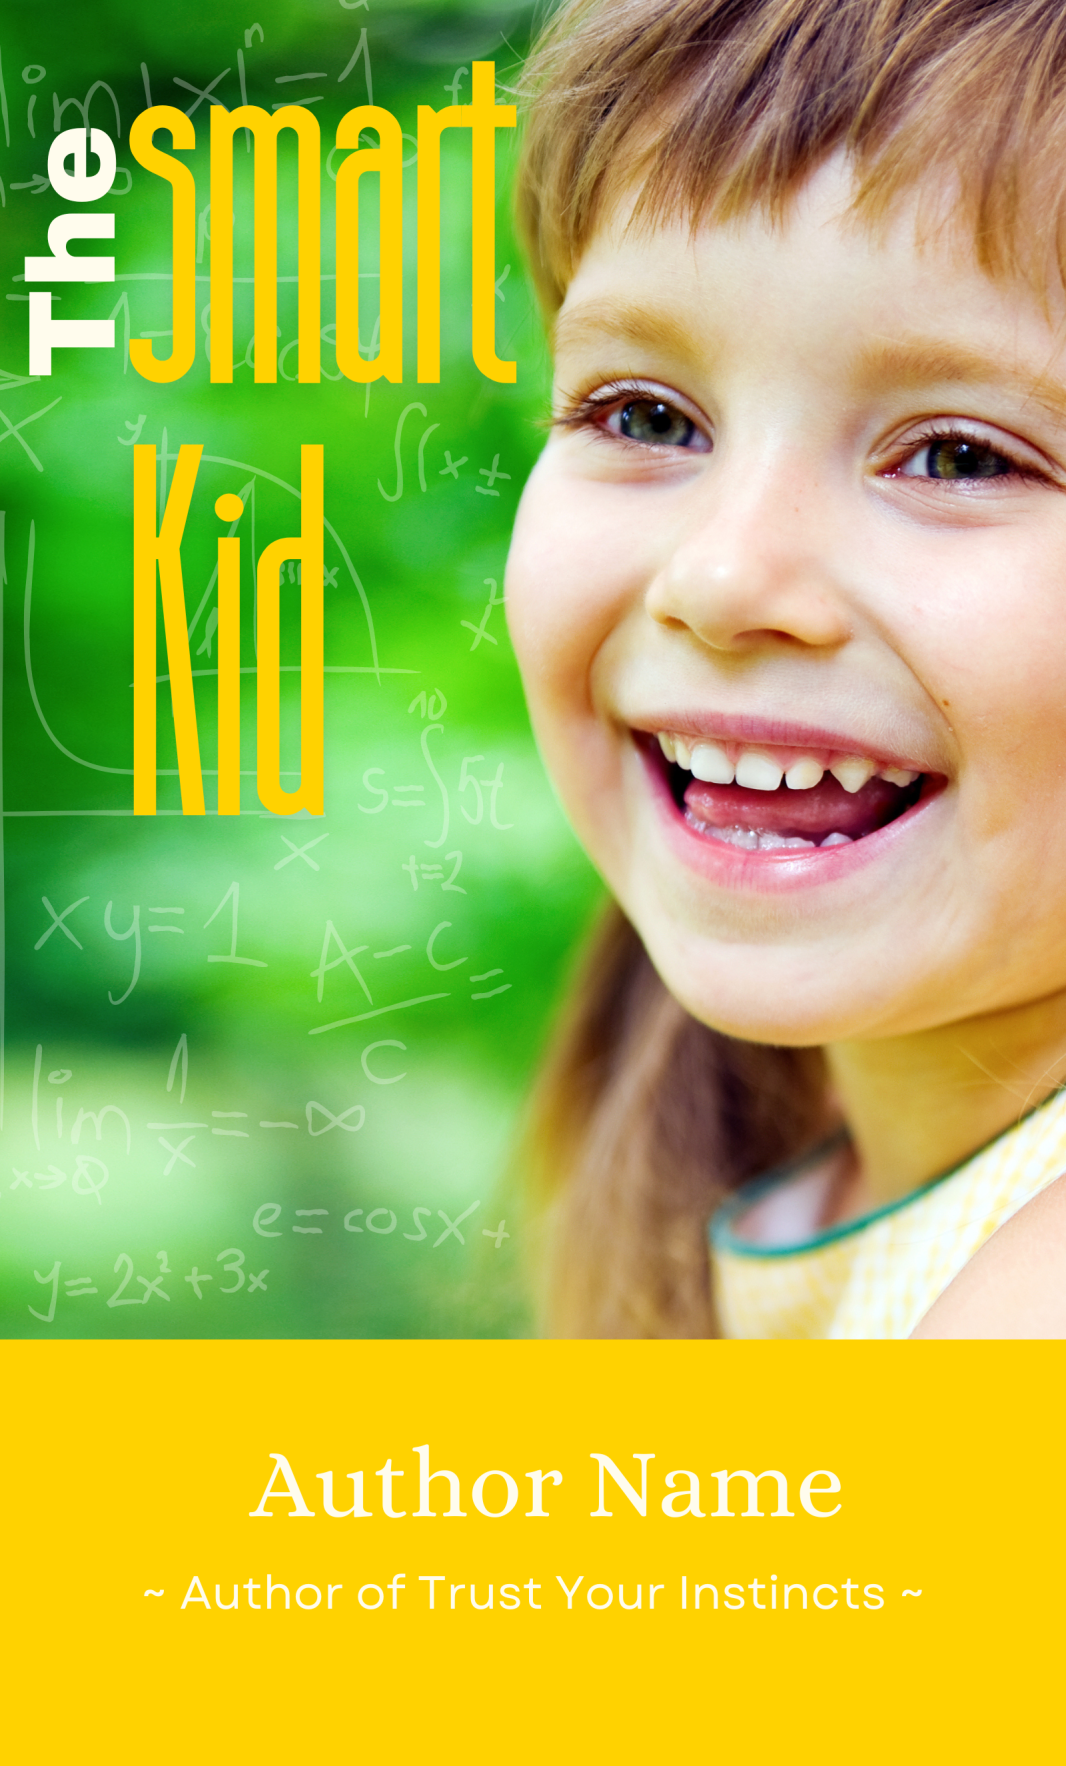 Cover of "Smart Kid: Premade Book Cover" titled "The Smart Kid." It features a smiling child with brown hair against a green background with mathematical equations. The title is in yellow and white text, and the author's name is mentioned at the bottom with "Author of Trust Your Instincts."
 BookSelf Book Cover Design & Premade Book Covers